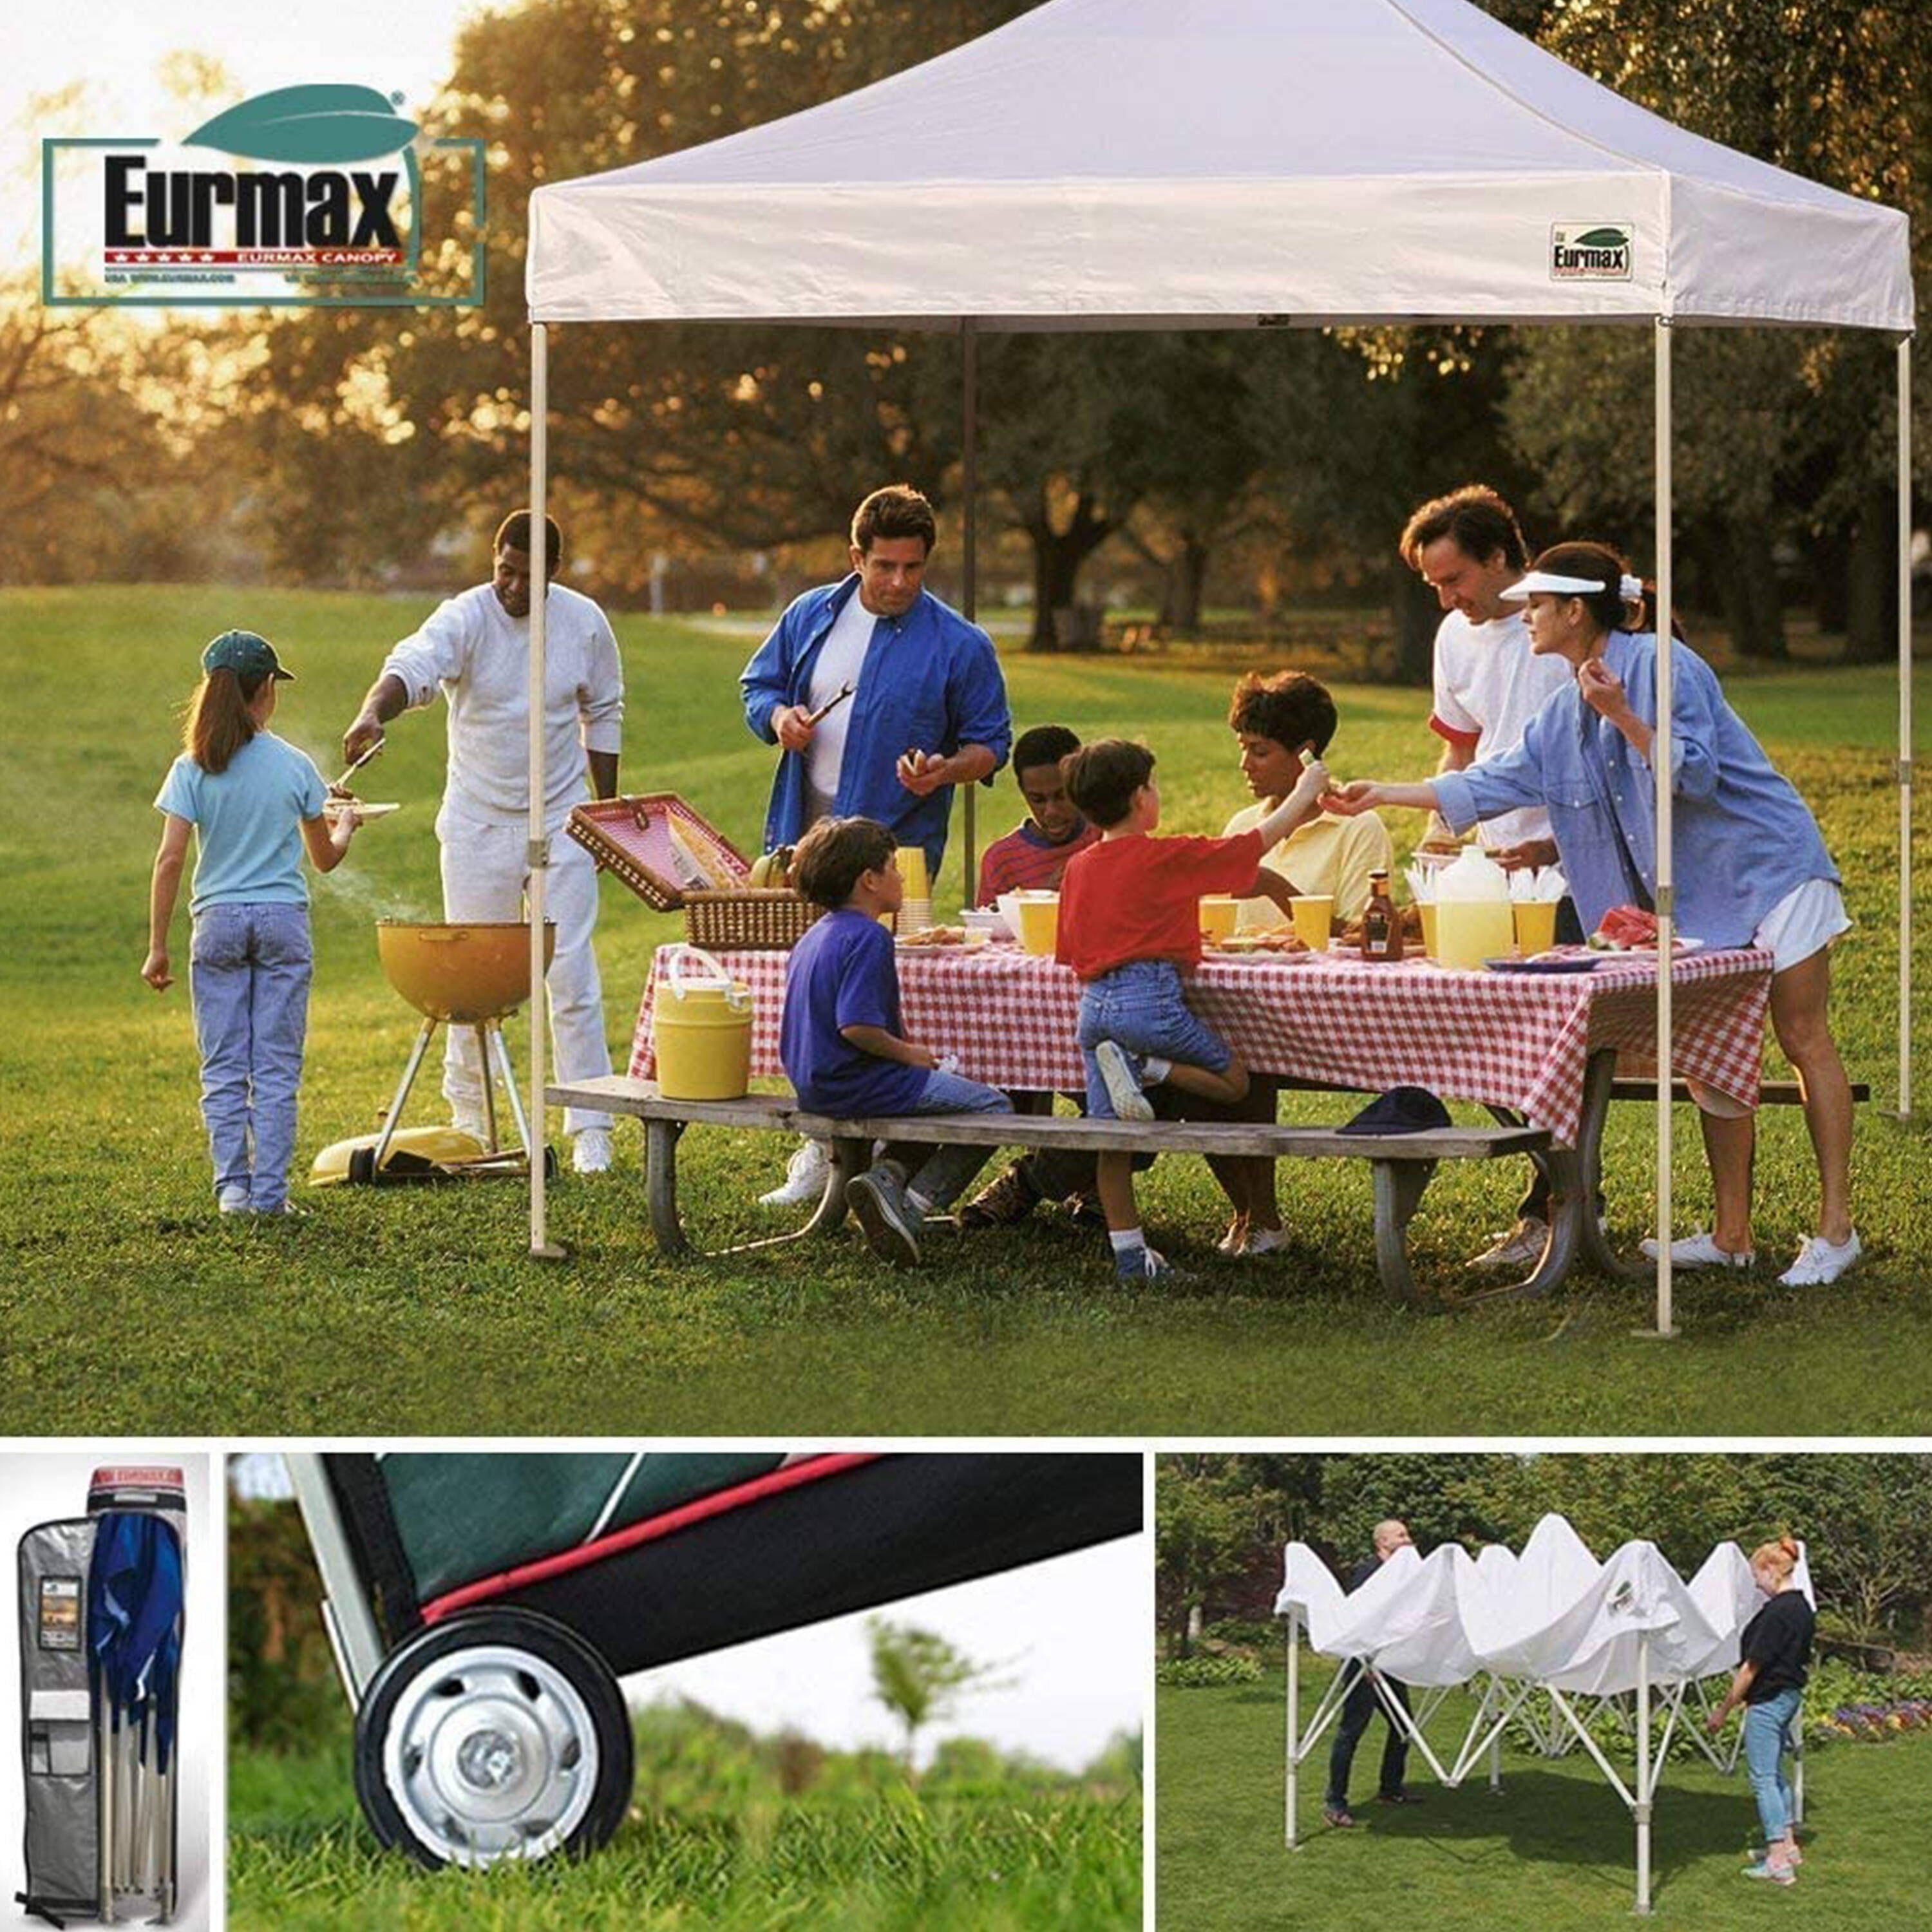 Eurmax 5x5 Pop up Canopy Outdoor Heavy Duty Tent,Red